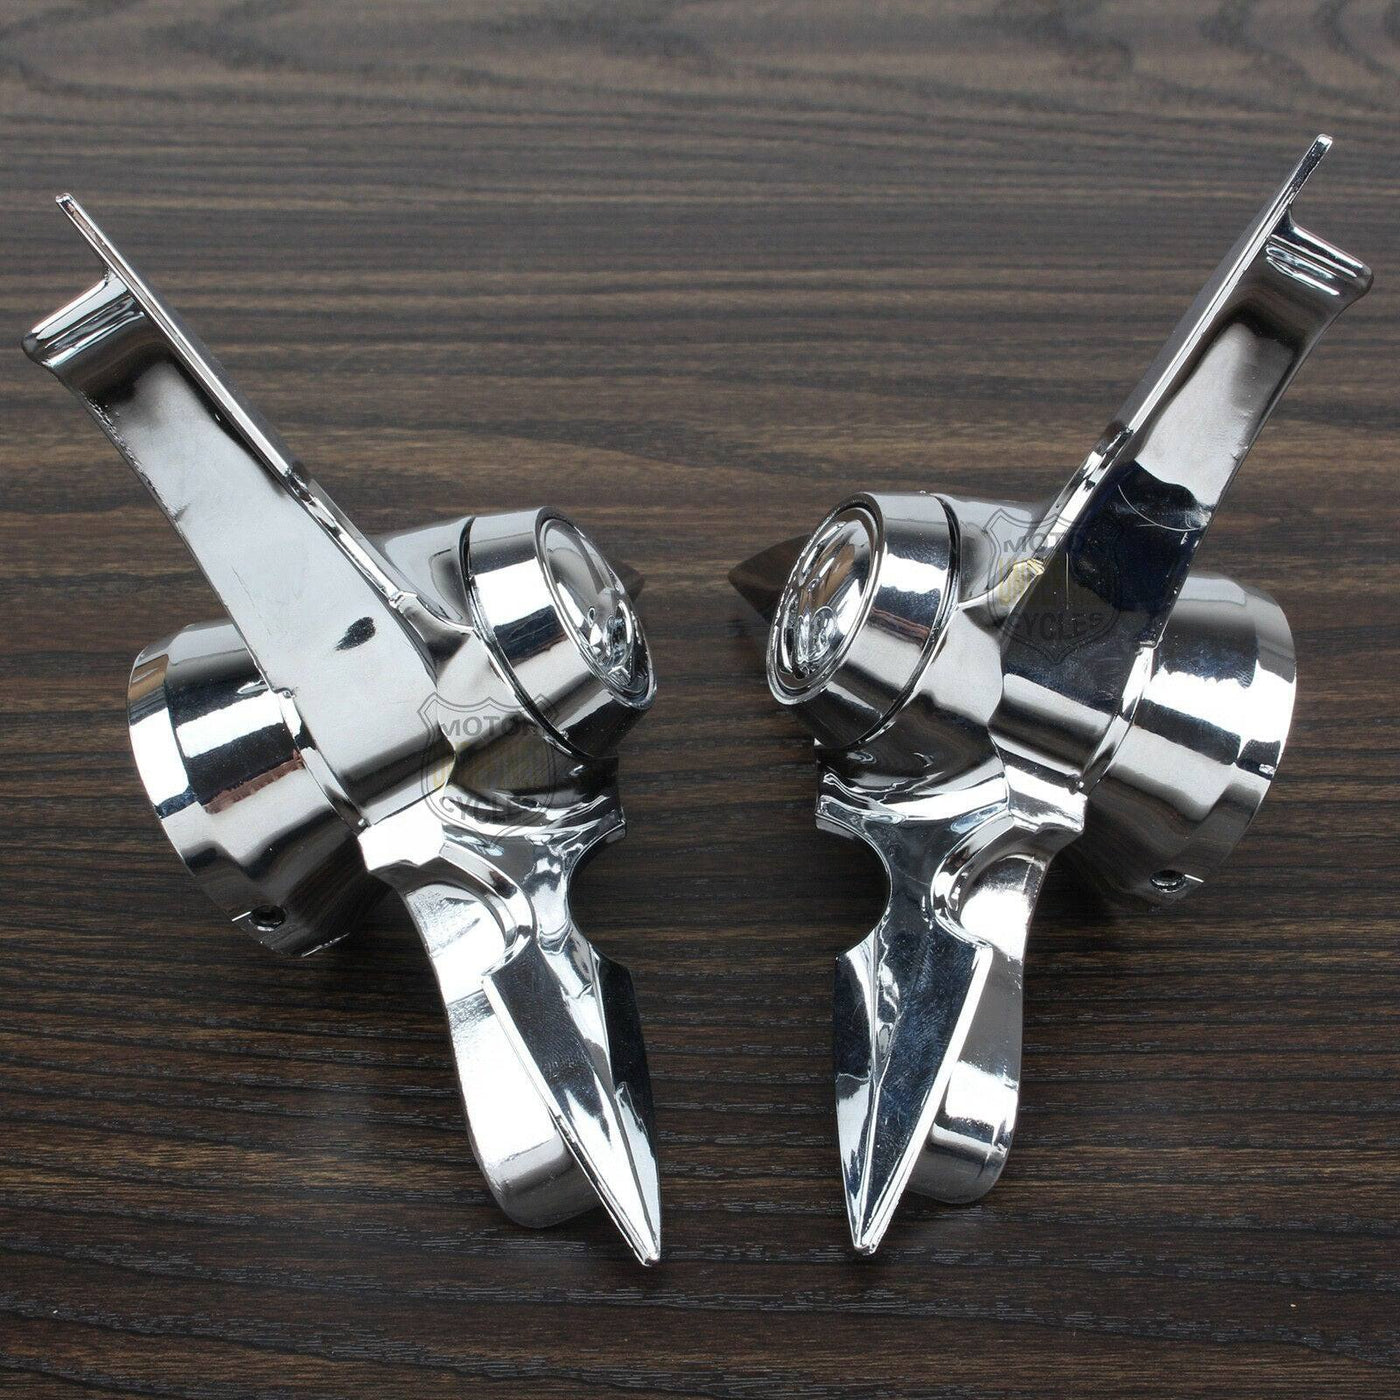 Skull Spun Blade Spinning Front Axle Cap Nut Cover Chrome For Harley Touring FLH - Moto Life Products